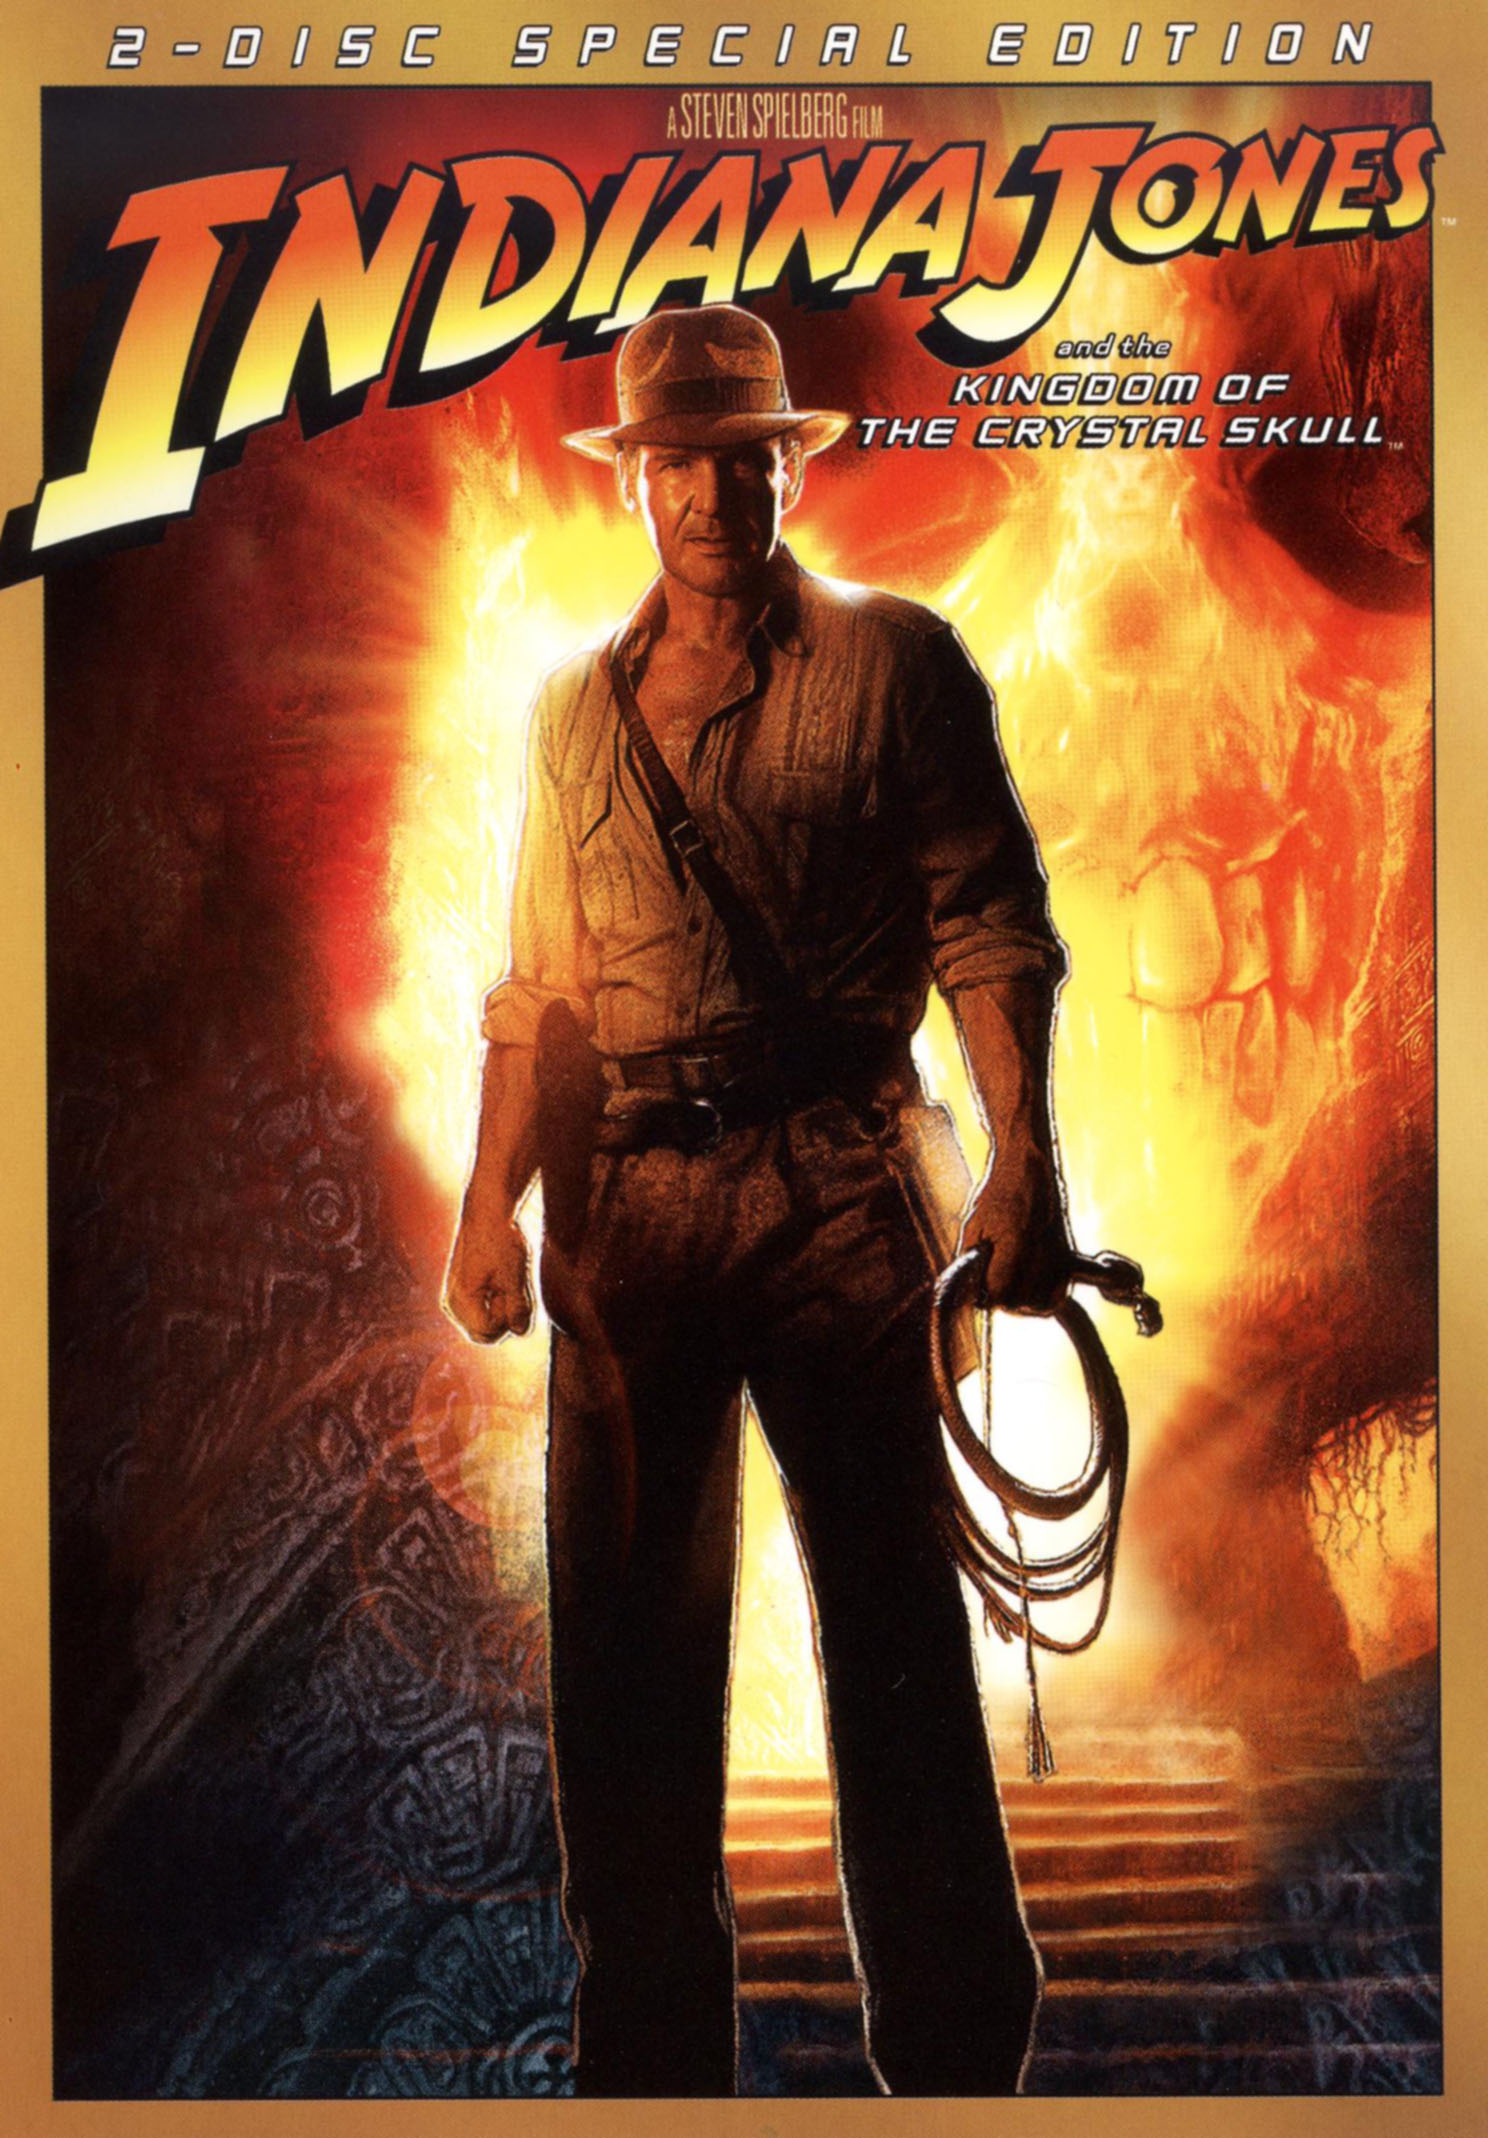 Indiana Jones and the Kingdom of the Crystal Skull (DVD, 2008) for sale  online